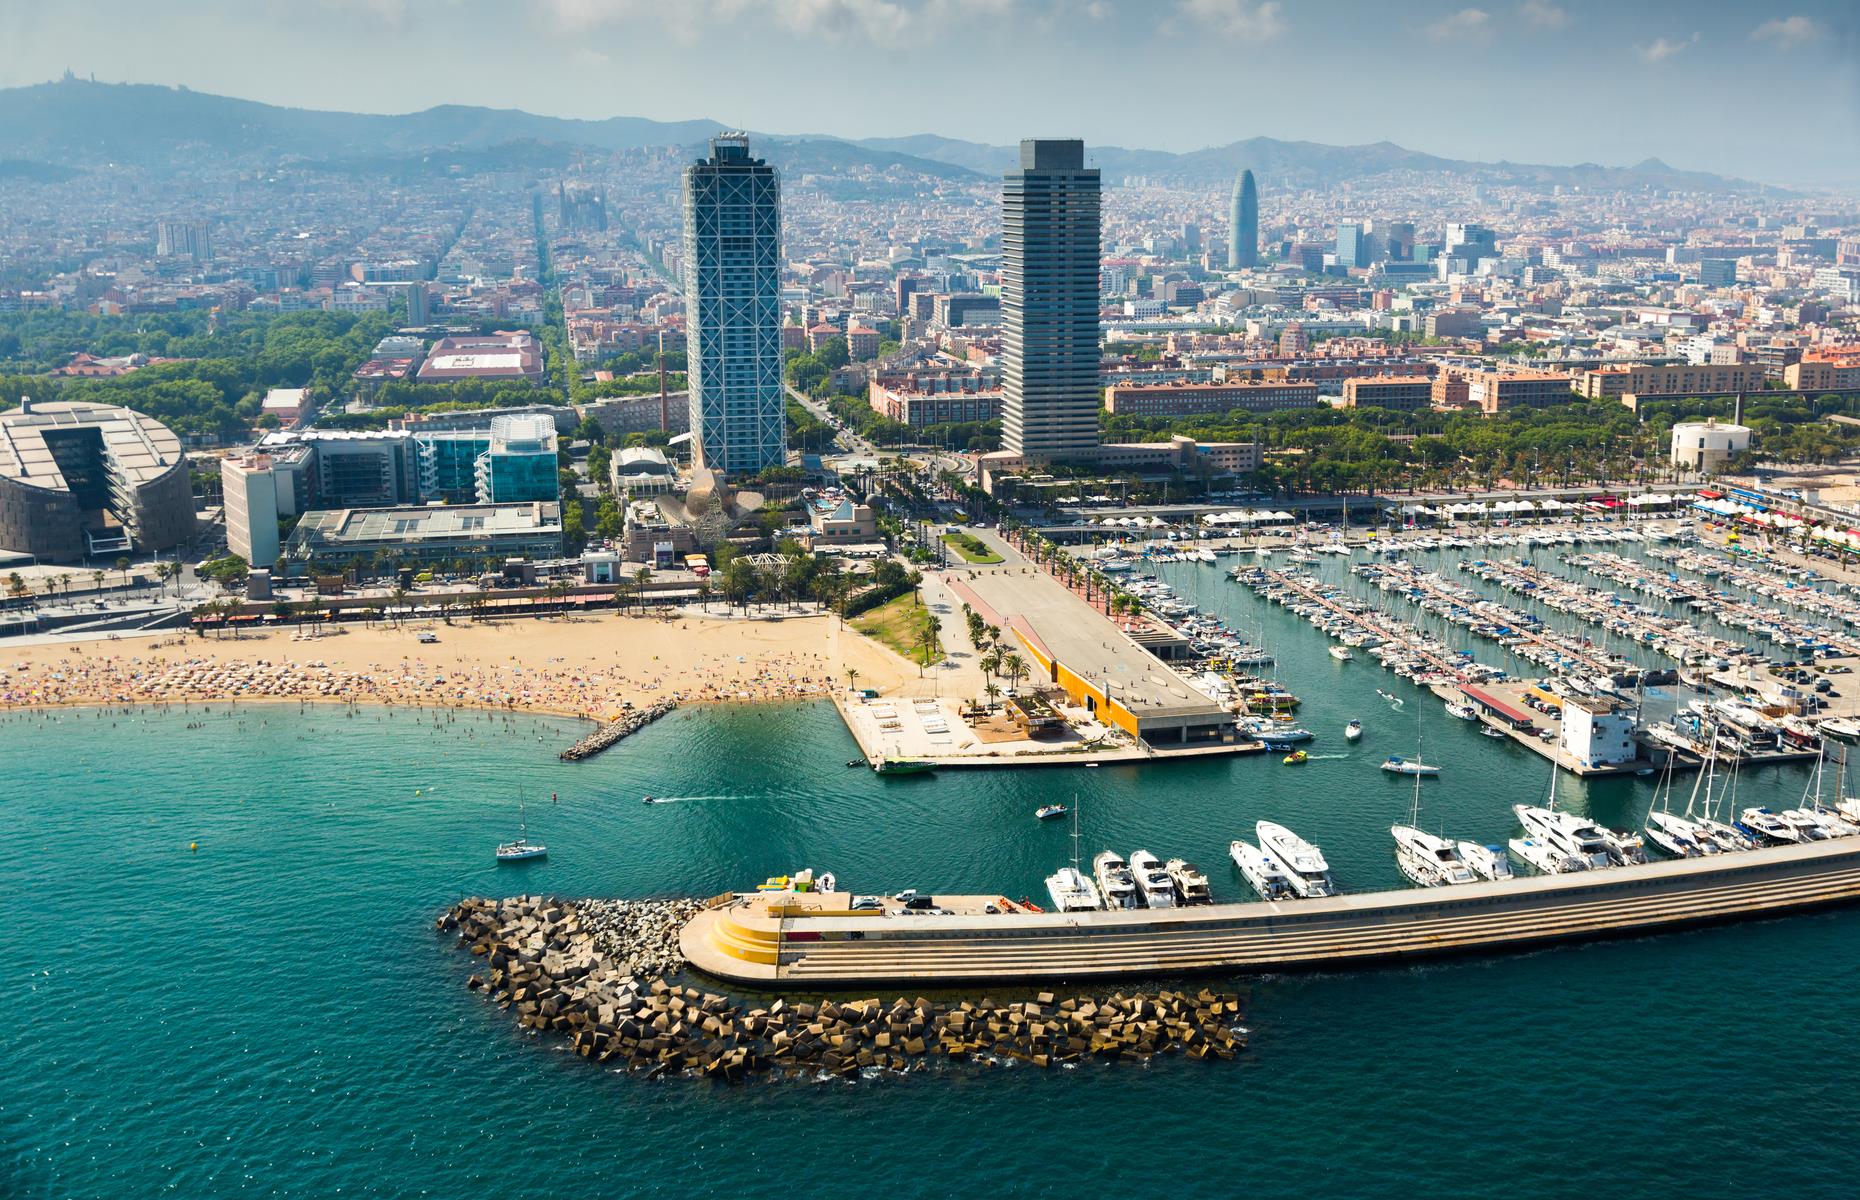 <p>Having been a trading hub for 2,000 years, the Port of Barcelona is also a major destination for cruises today. Captured from above in this spectacular aerial shot, the attractive port is within easy reach of the city center and beach.</p>